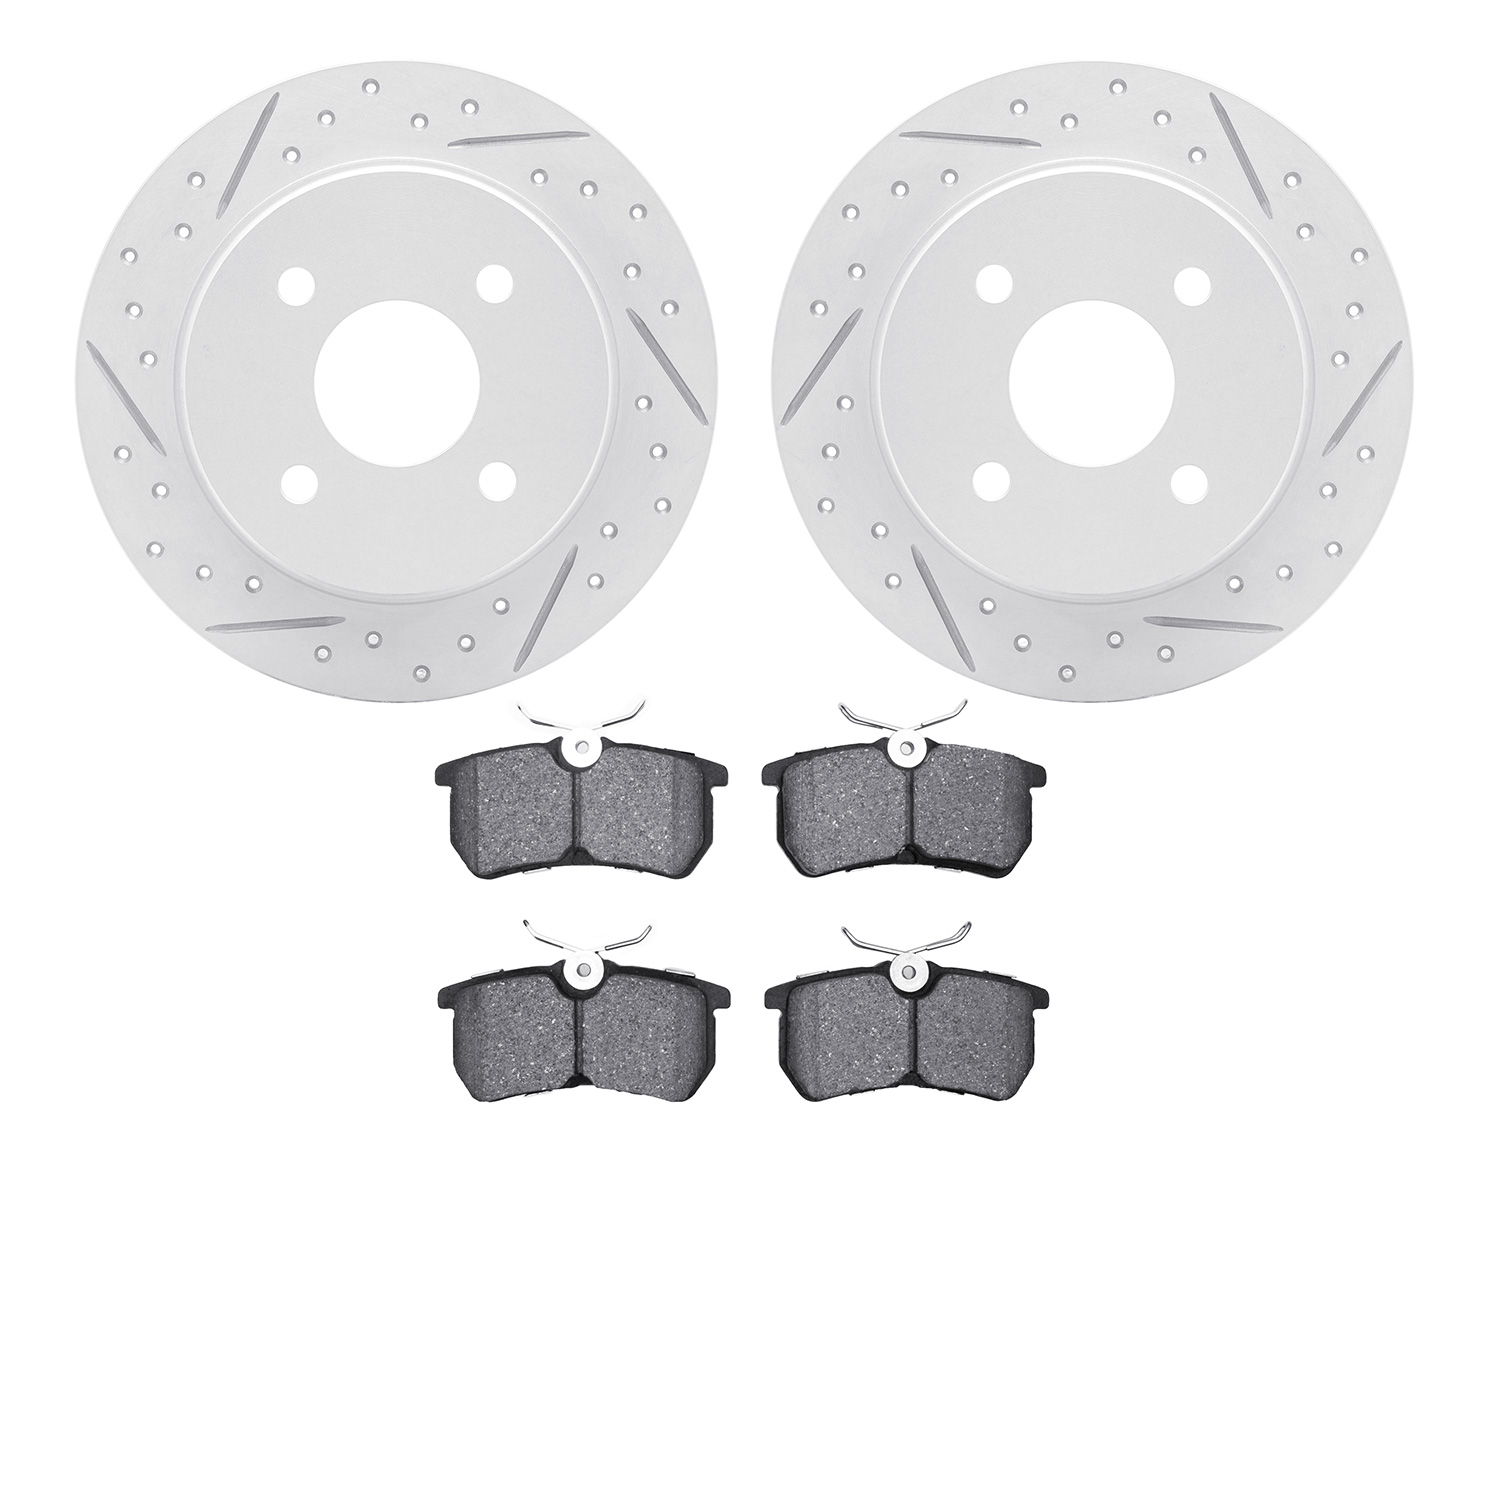 2502-54034 Geoperformance Drilled/Slotted Rotors w/5000 Advanced Brake Pads Kit, 2001-2019 Ford/Lincoln/Mercury/Mazda, Position: